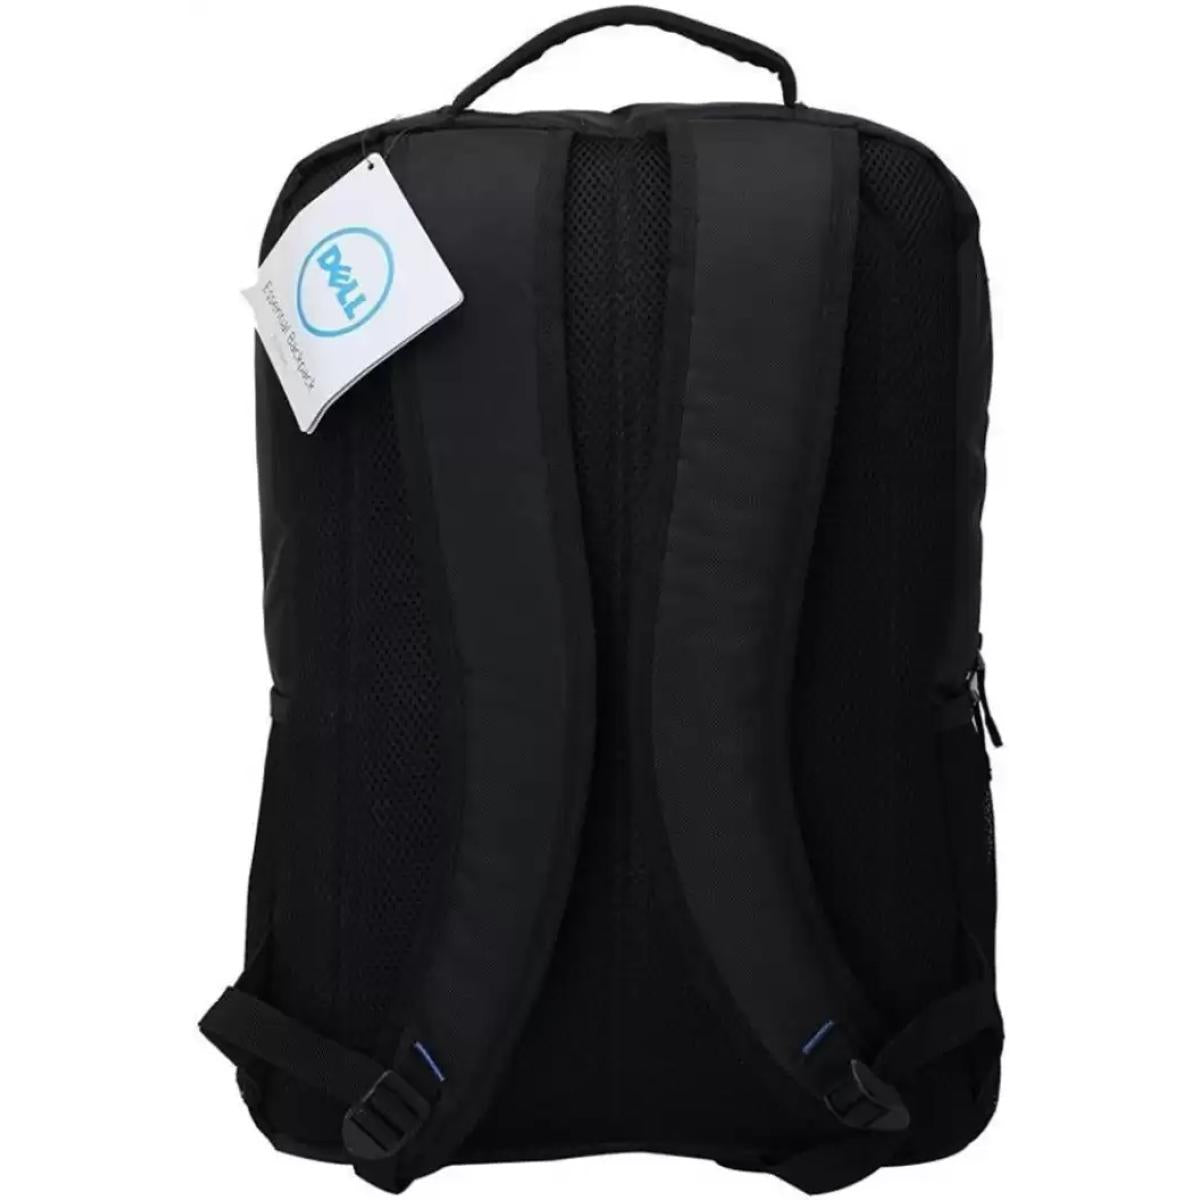 Dell Laptop Bags: Best Dell Laptop Bag in India to Protect and Carry your  Laptop Wherever You Go - The Economic Times